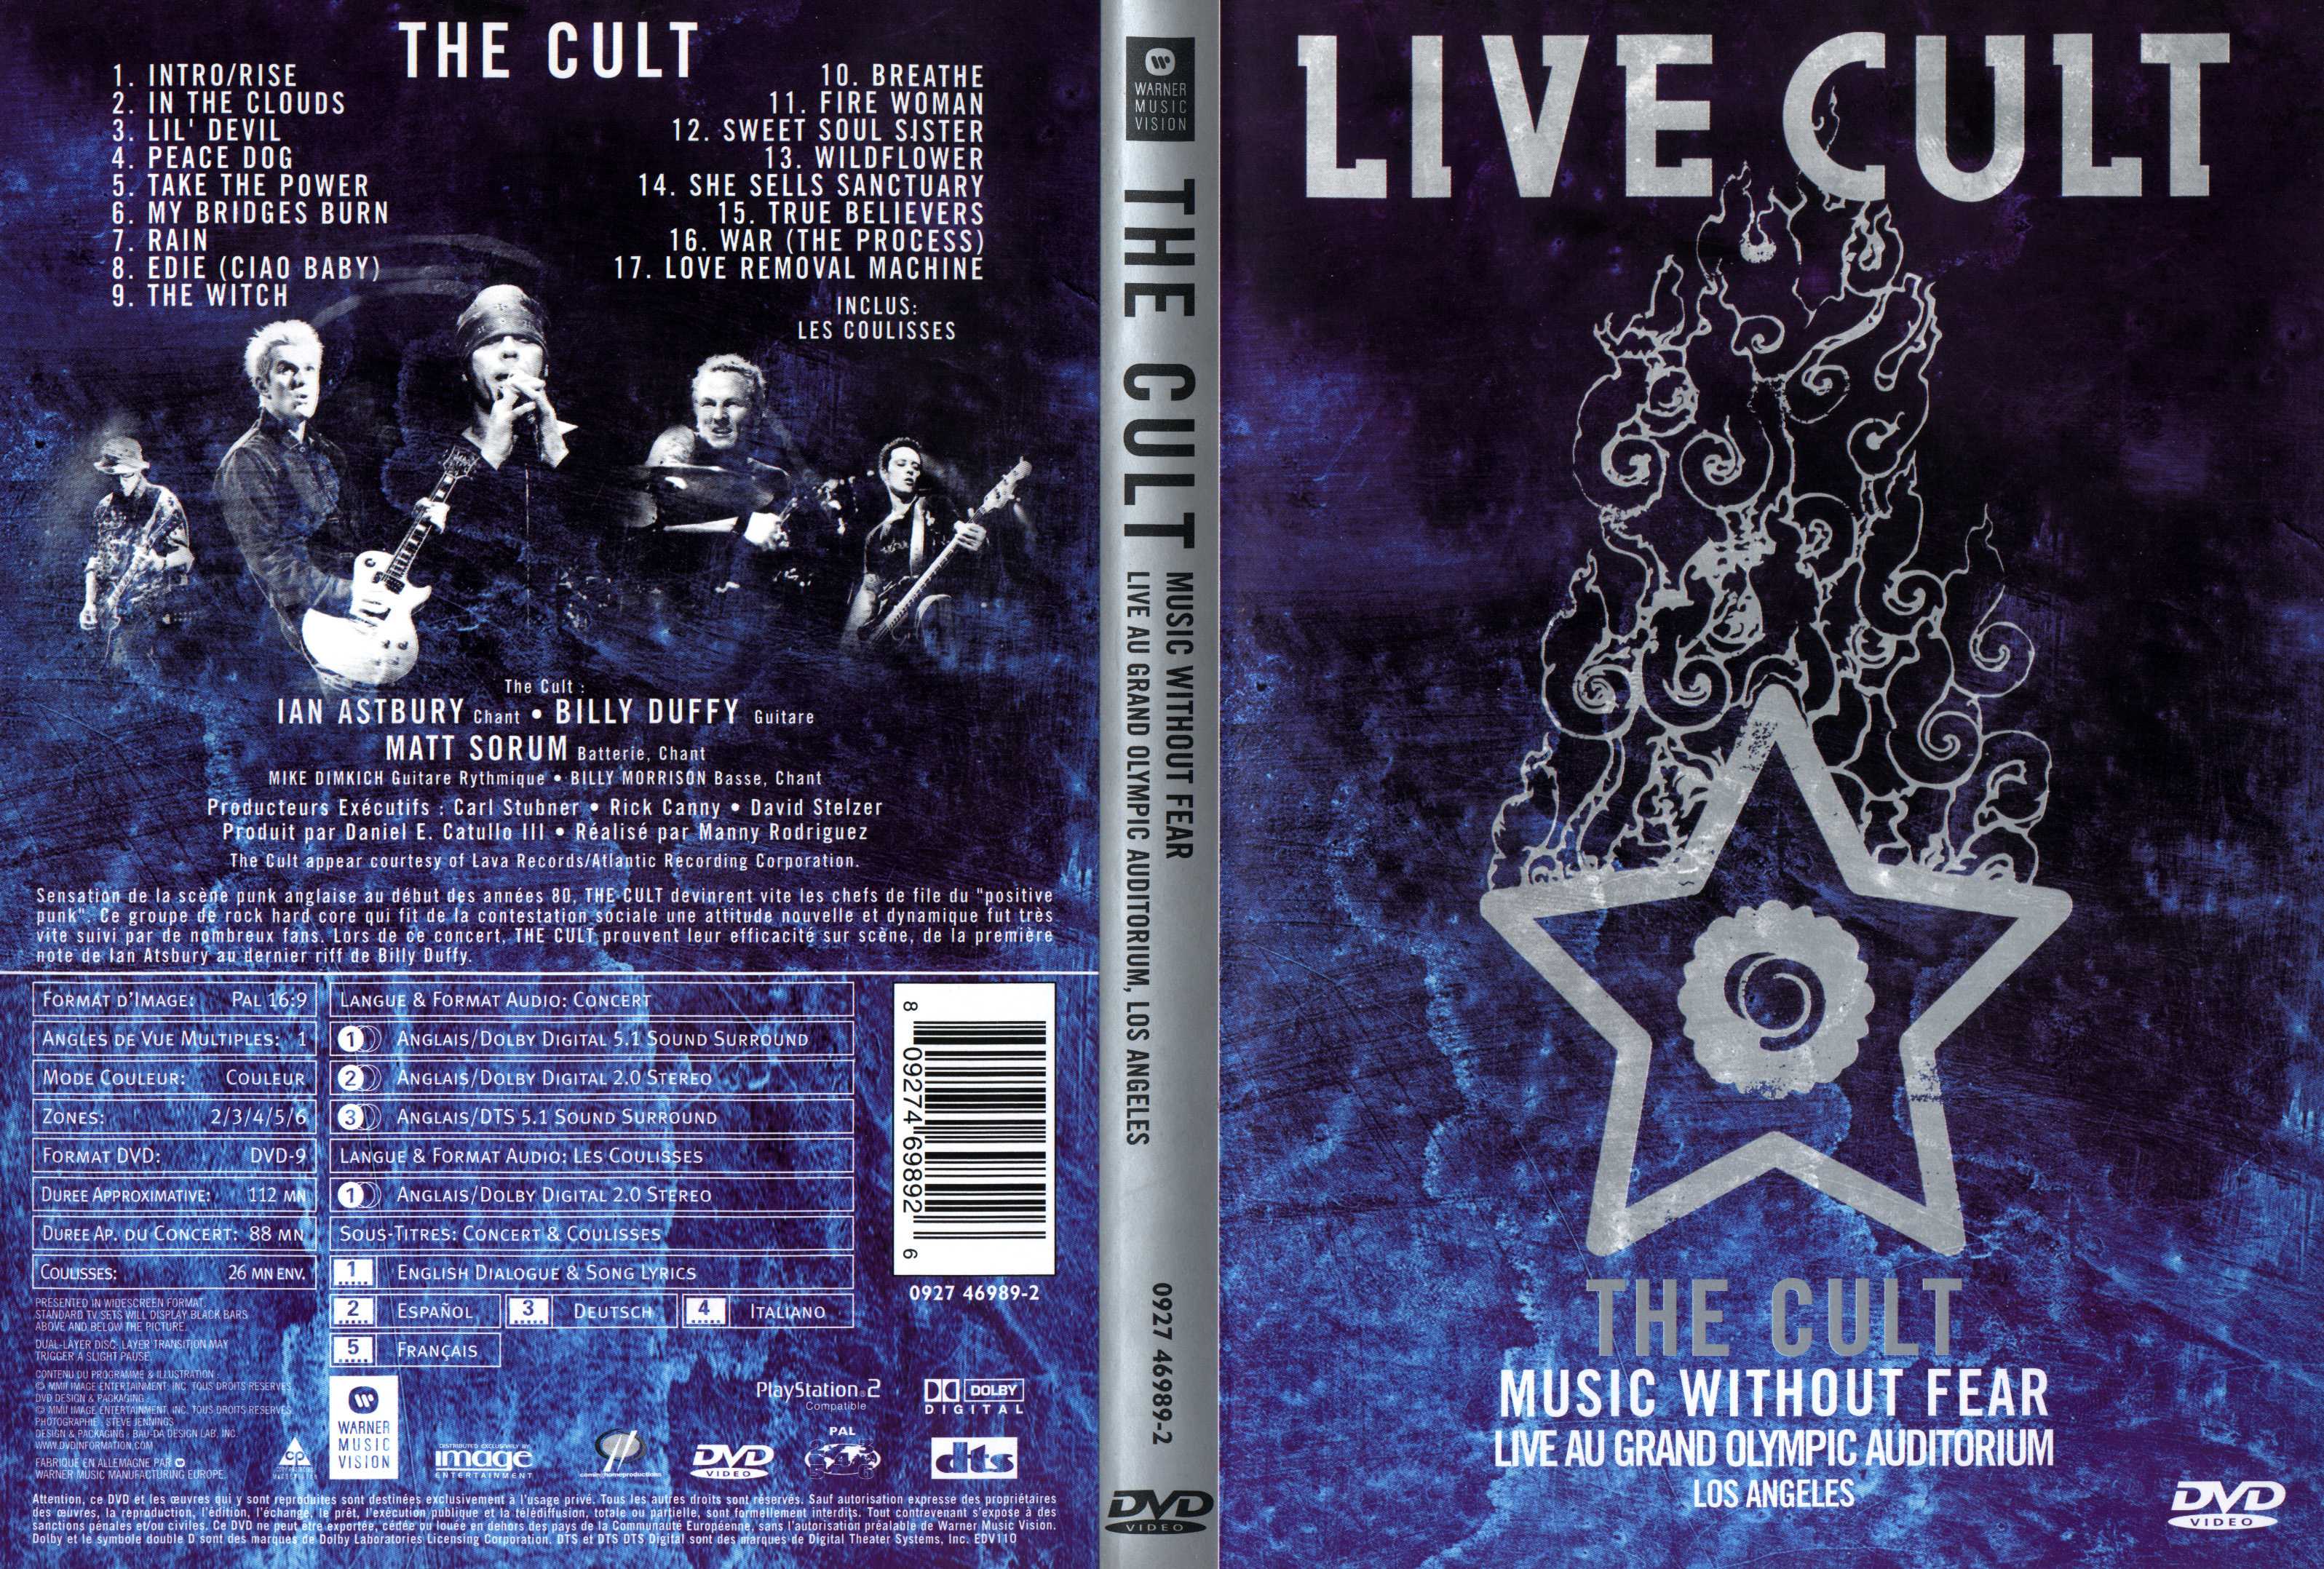 Jaquette DVD The cult live cult